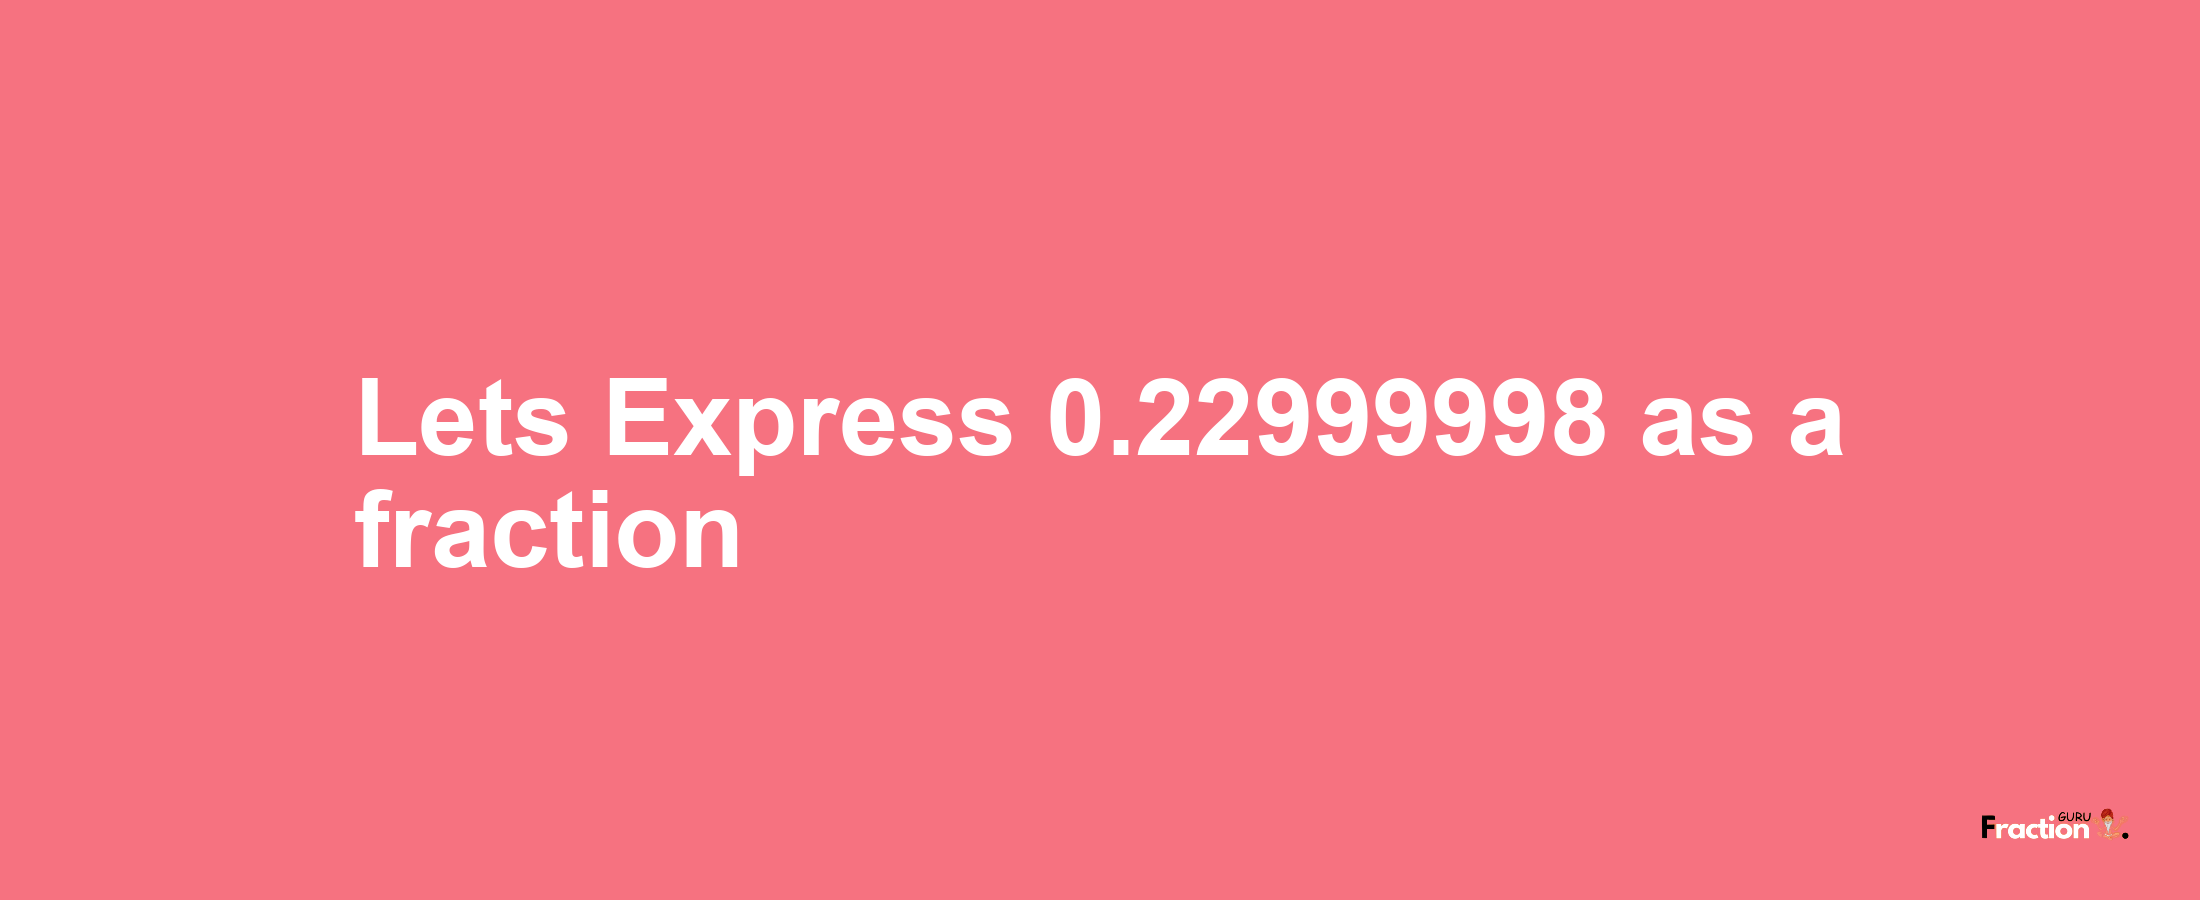 Lets Express 0.22999998 as afraction